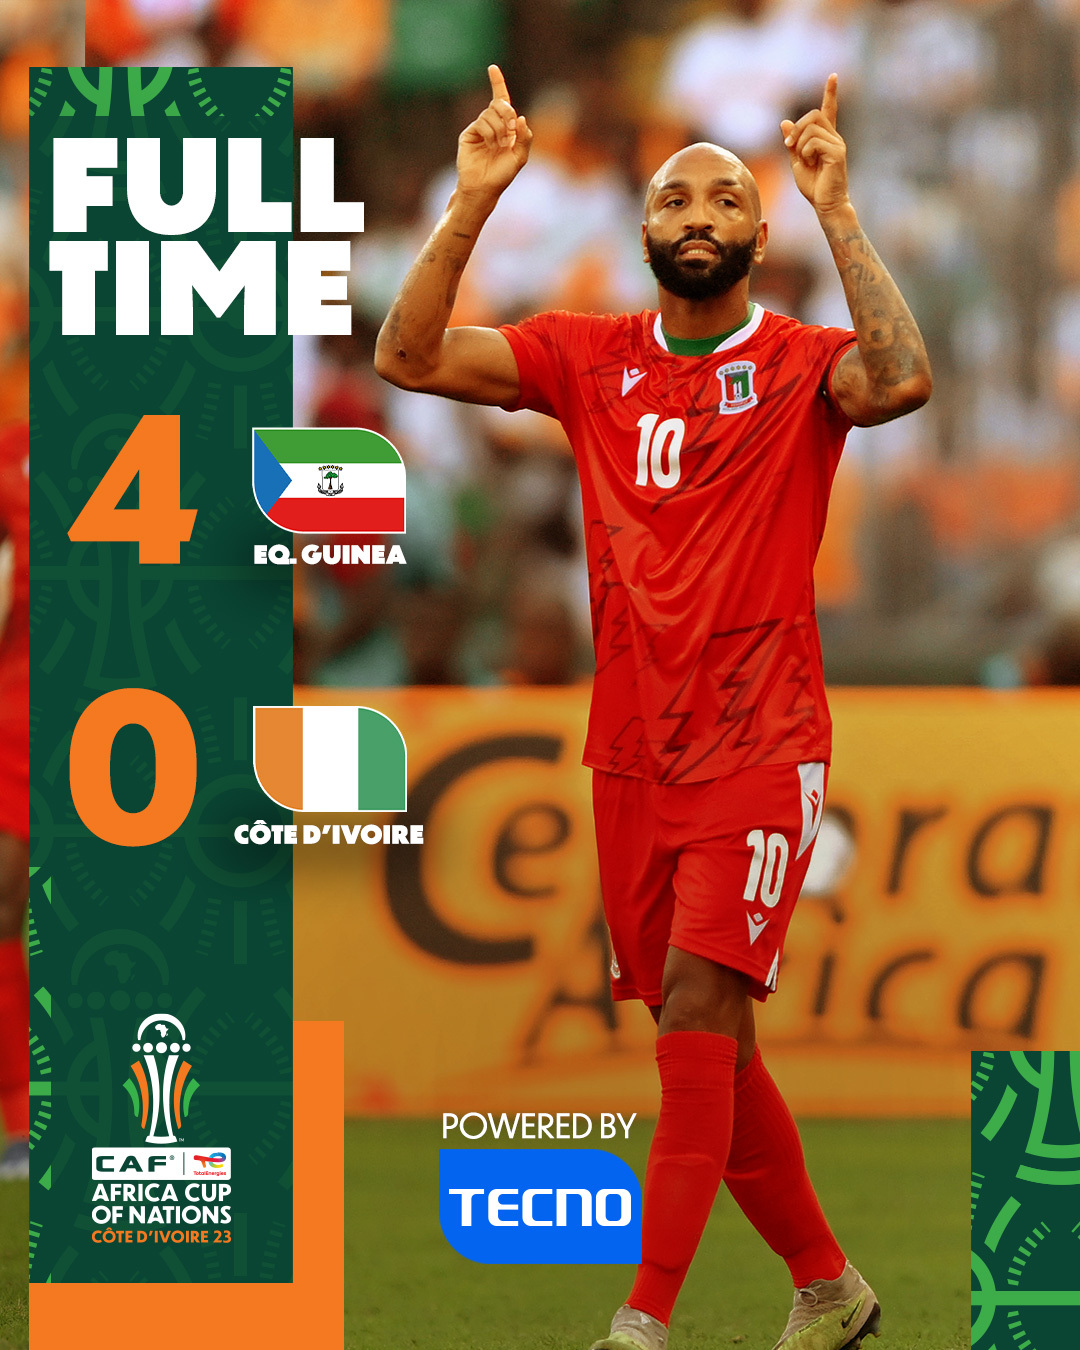 AFCON: Equatorial Guinea knocks out host nation Ivory Coast after 4 – 0 victory